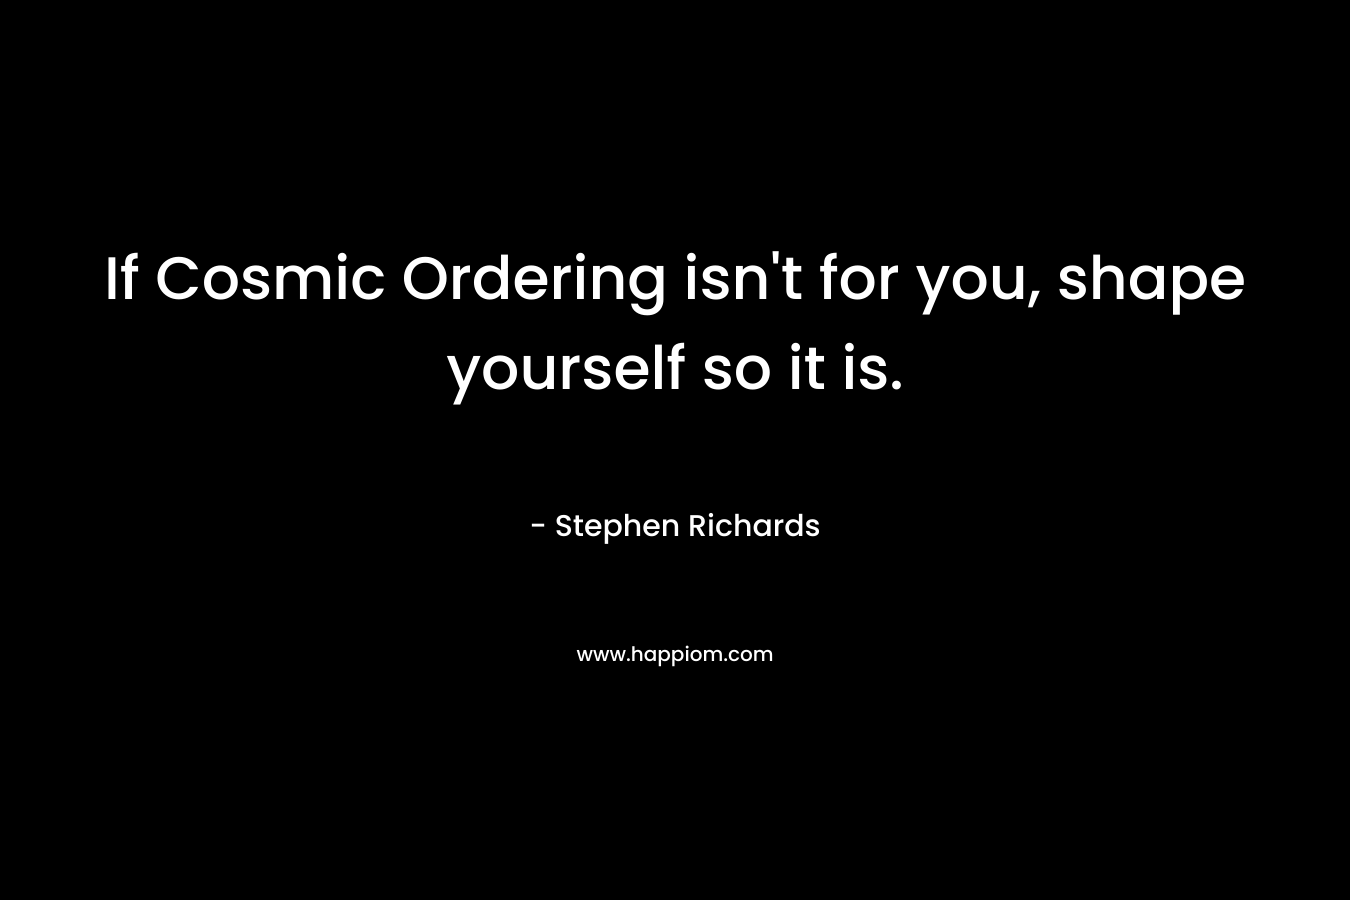 If Cosmic Ordering isn't for you, shape yourself so it is.